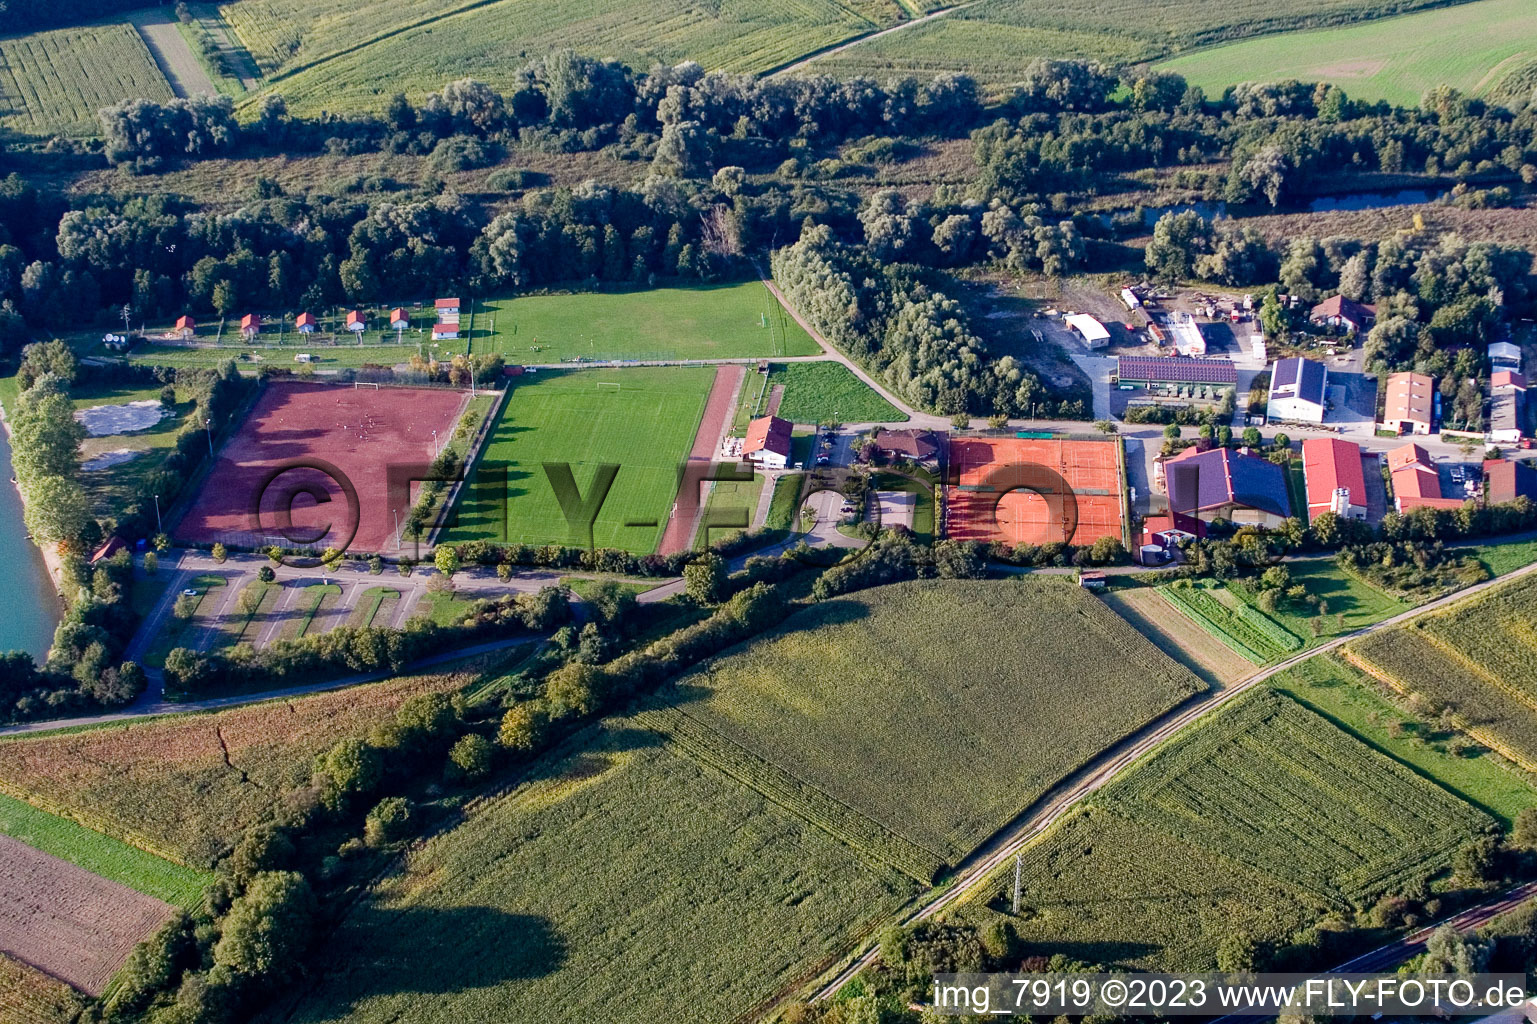 Aerial view of Sports fields in Neuburg in the state Rhineland-Palatinate, Germany